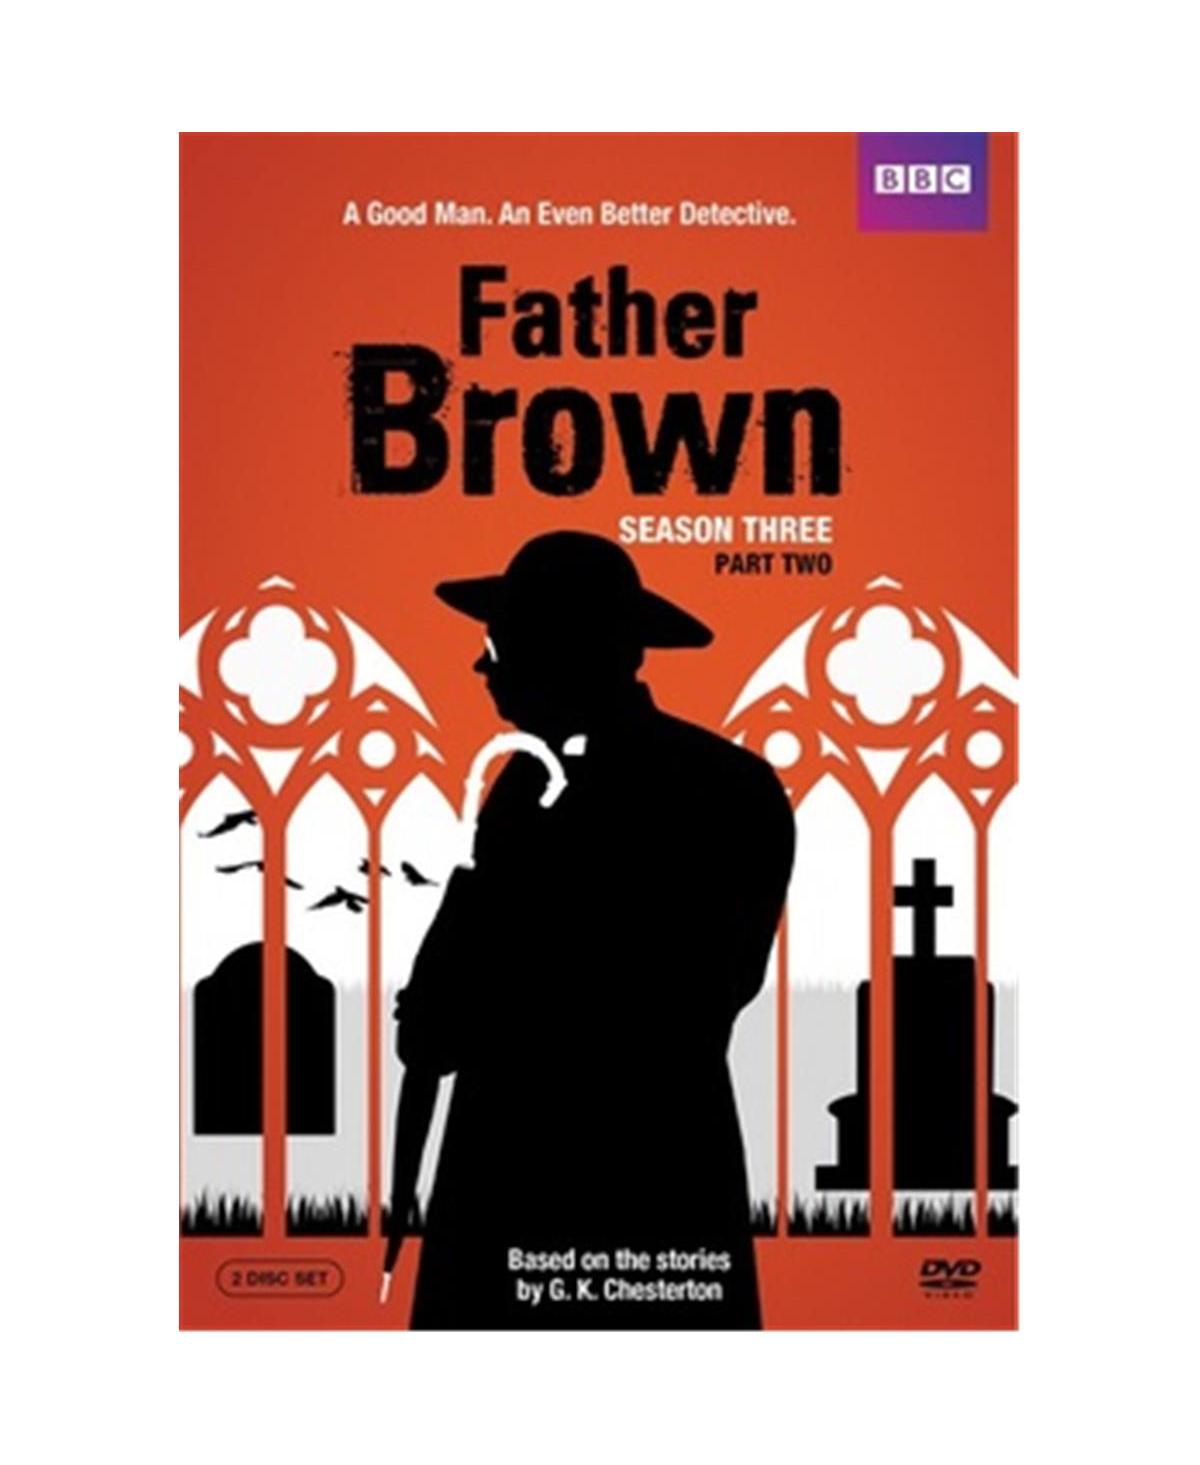 Warner Bros Warner Home Video Father Brown Season Three, Part Two Dvd In White